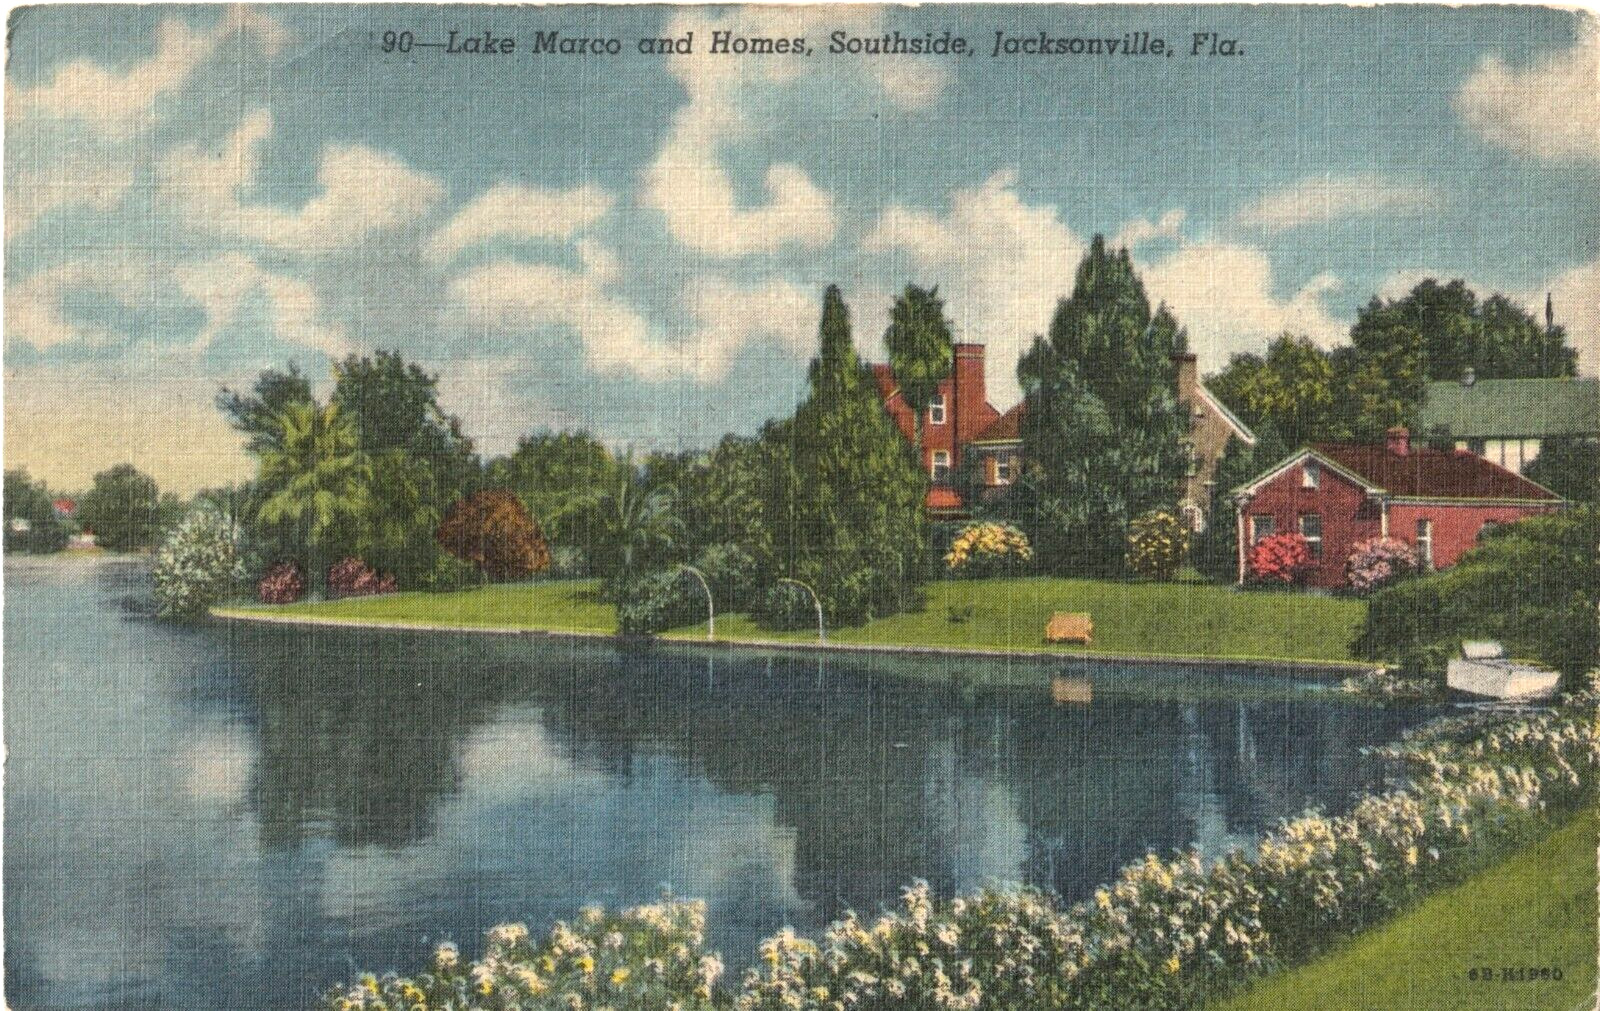 Lake Marco and Homes-Southside-Jacksonville, Florida FL-antique unposted